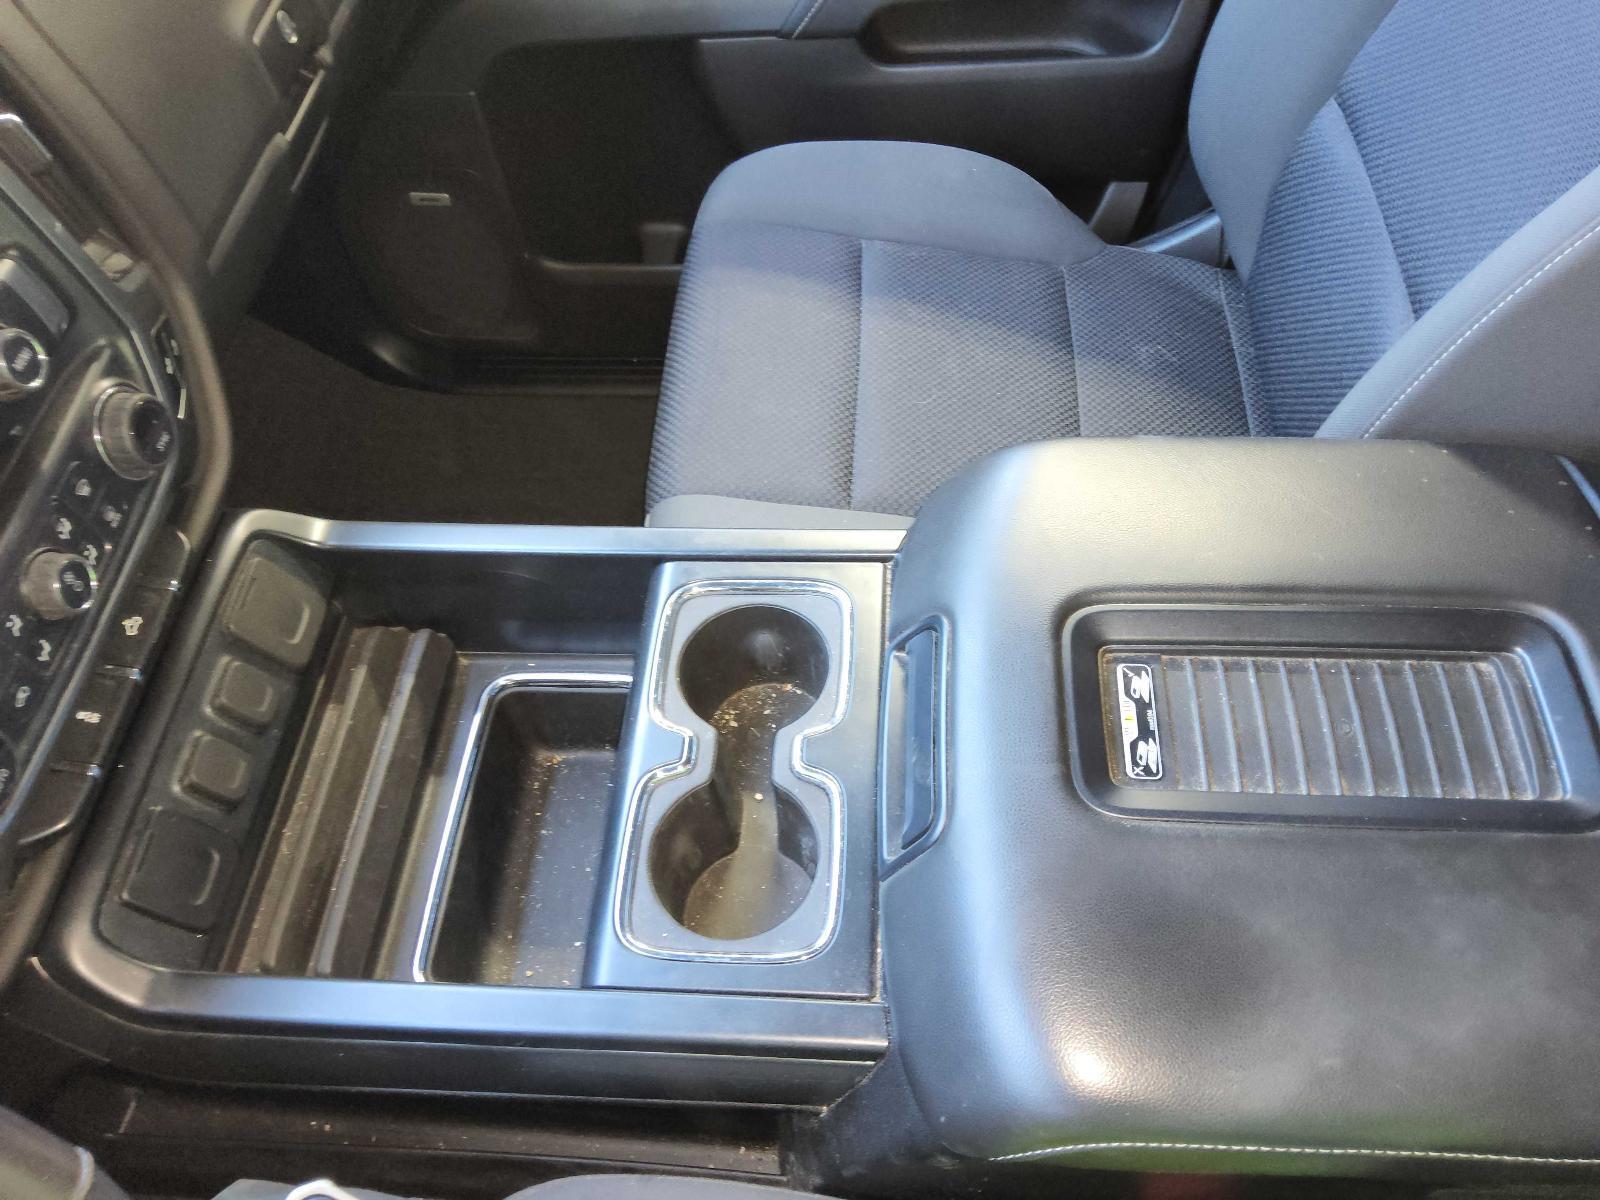 Used Front Lower Center Console fits: 2018 Chevrolet Silverado 1500 pickup floor